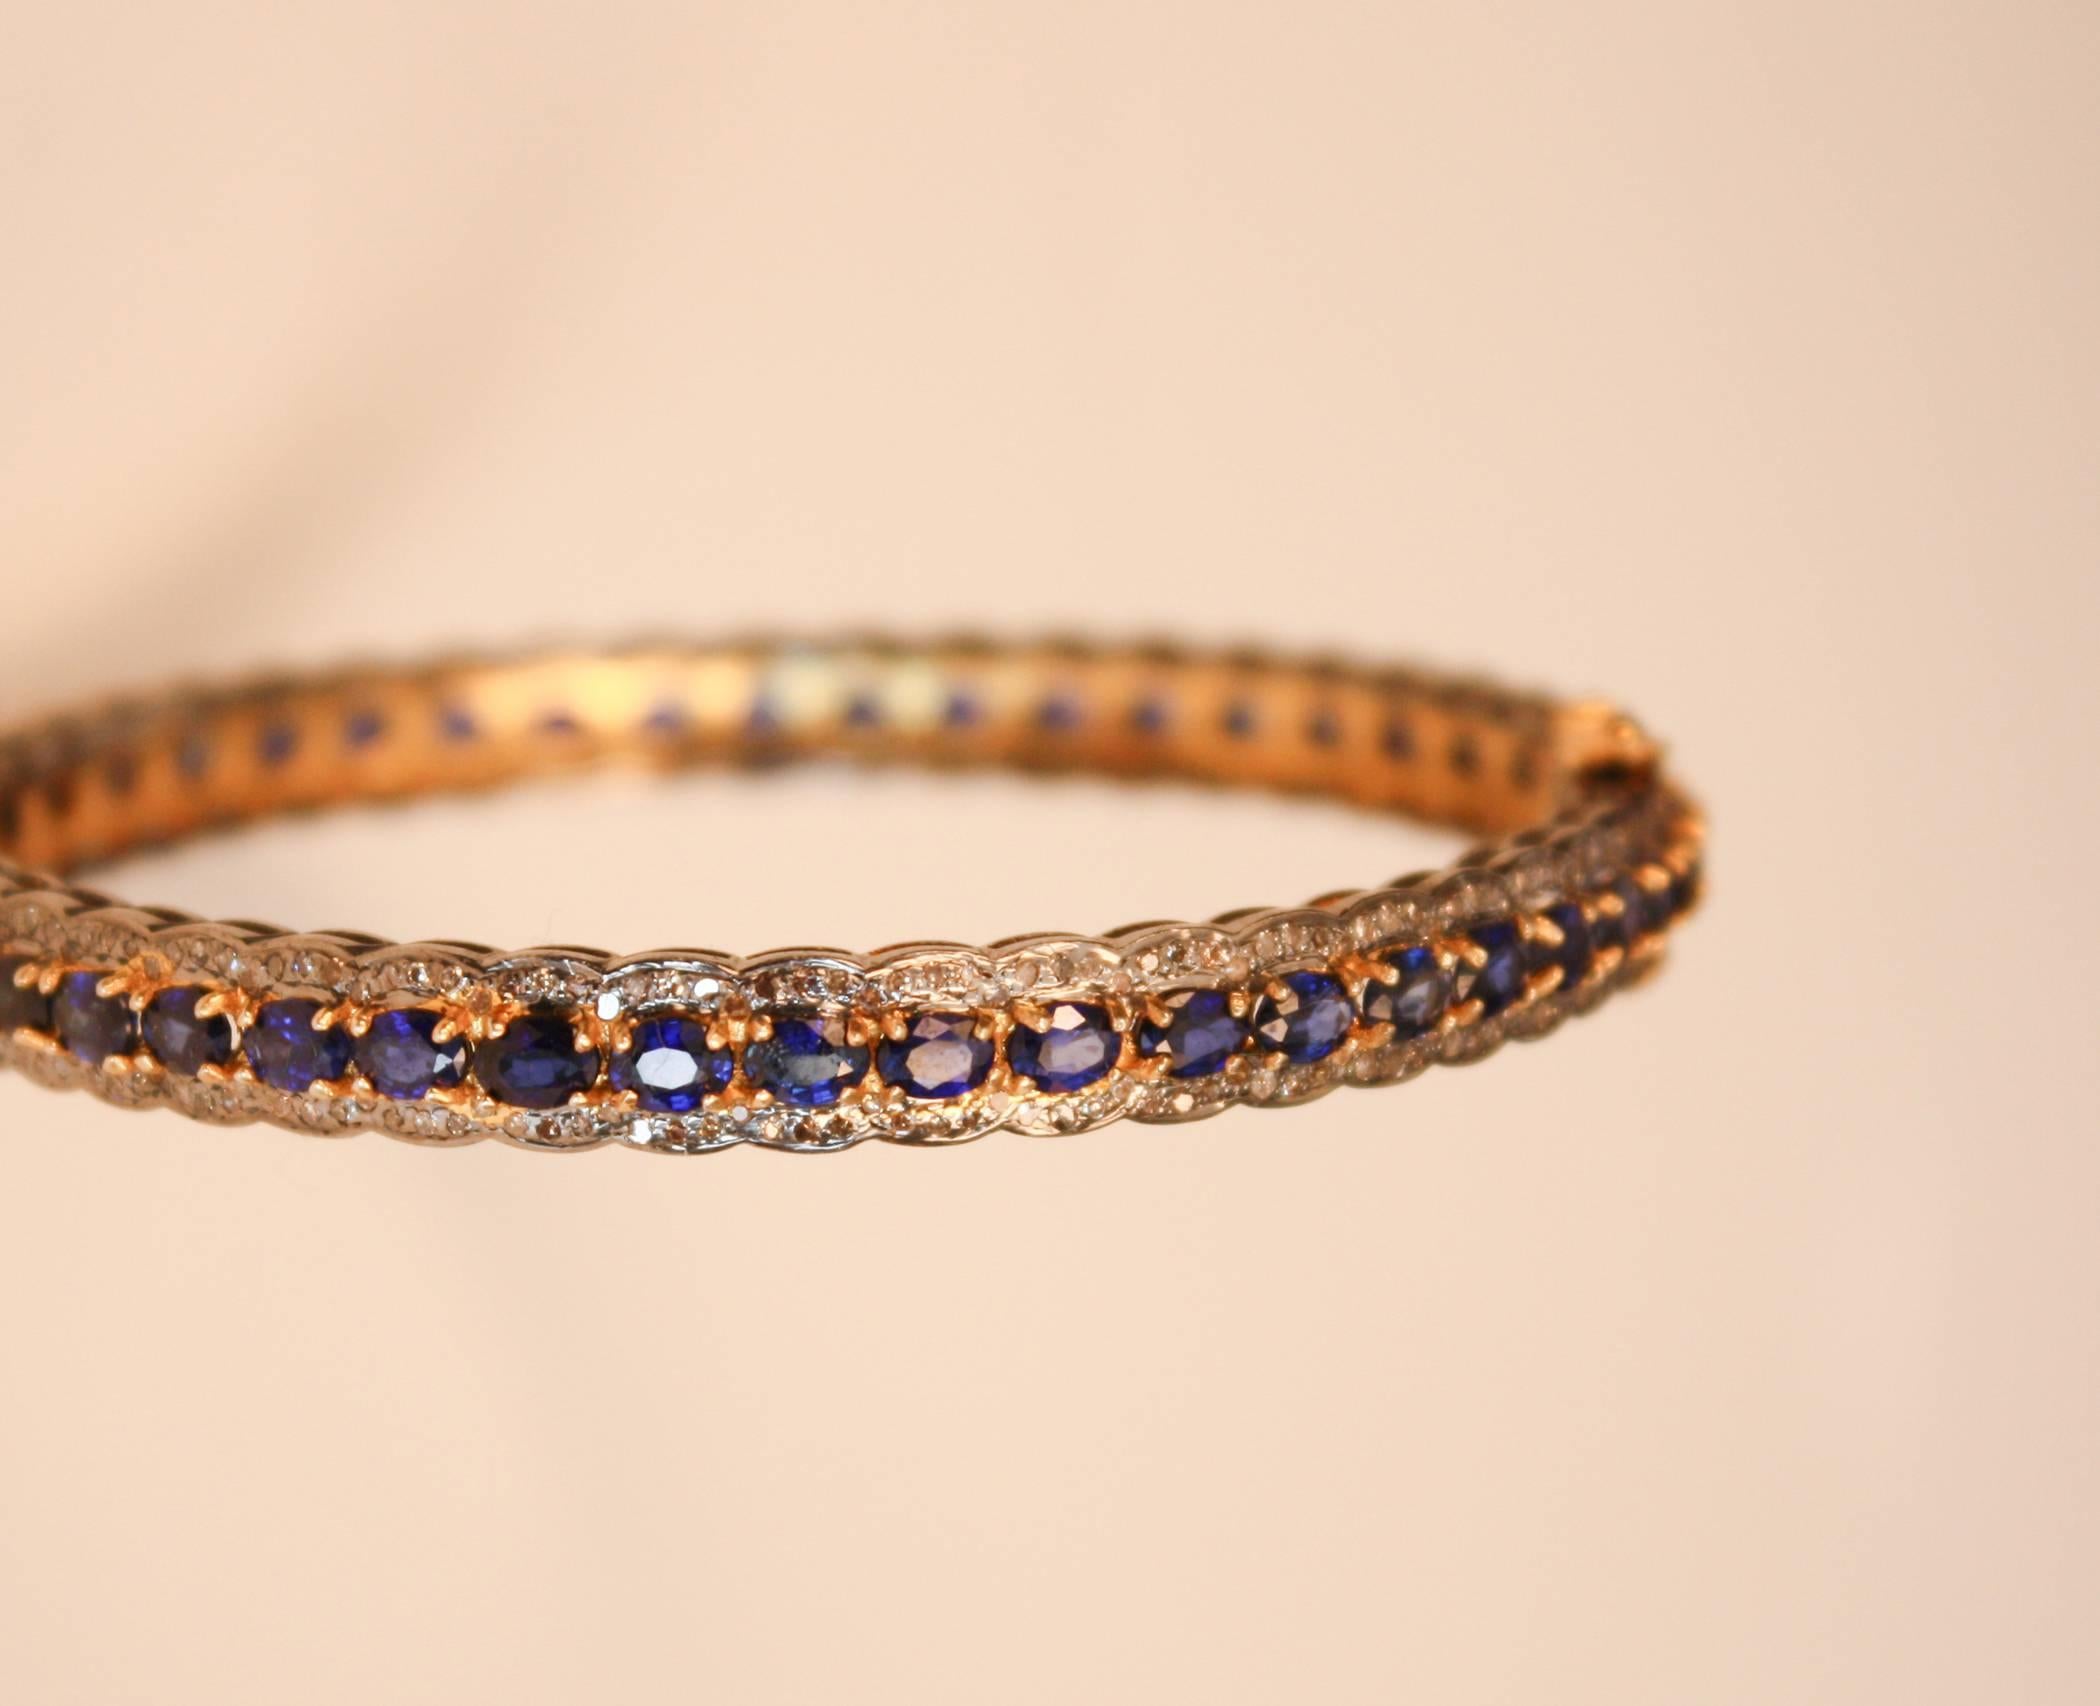 Faceted blue sapphires surrounded by single cut, pave set diamonds adorn this wearable bangle. The gems are set in sterling silver and the inside of the bracelet is gold vermeil. The safeties are 14k gold.
Inside diameter: 2.25